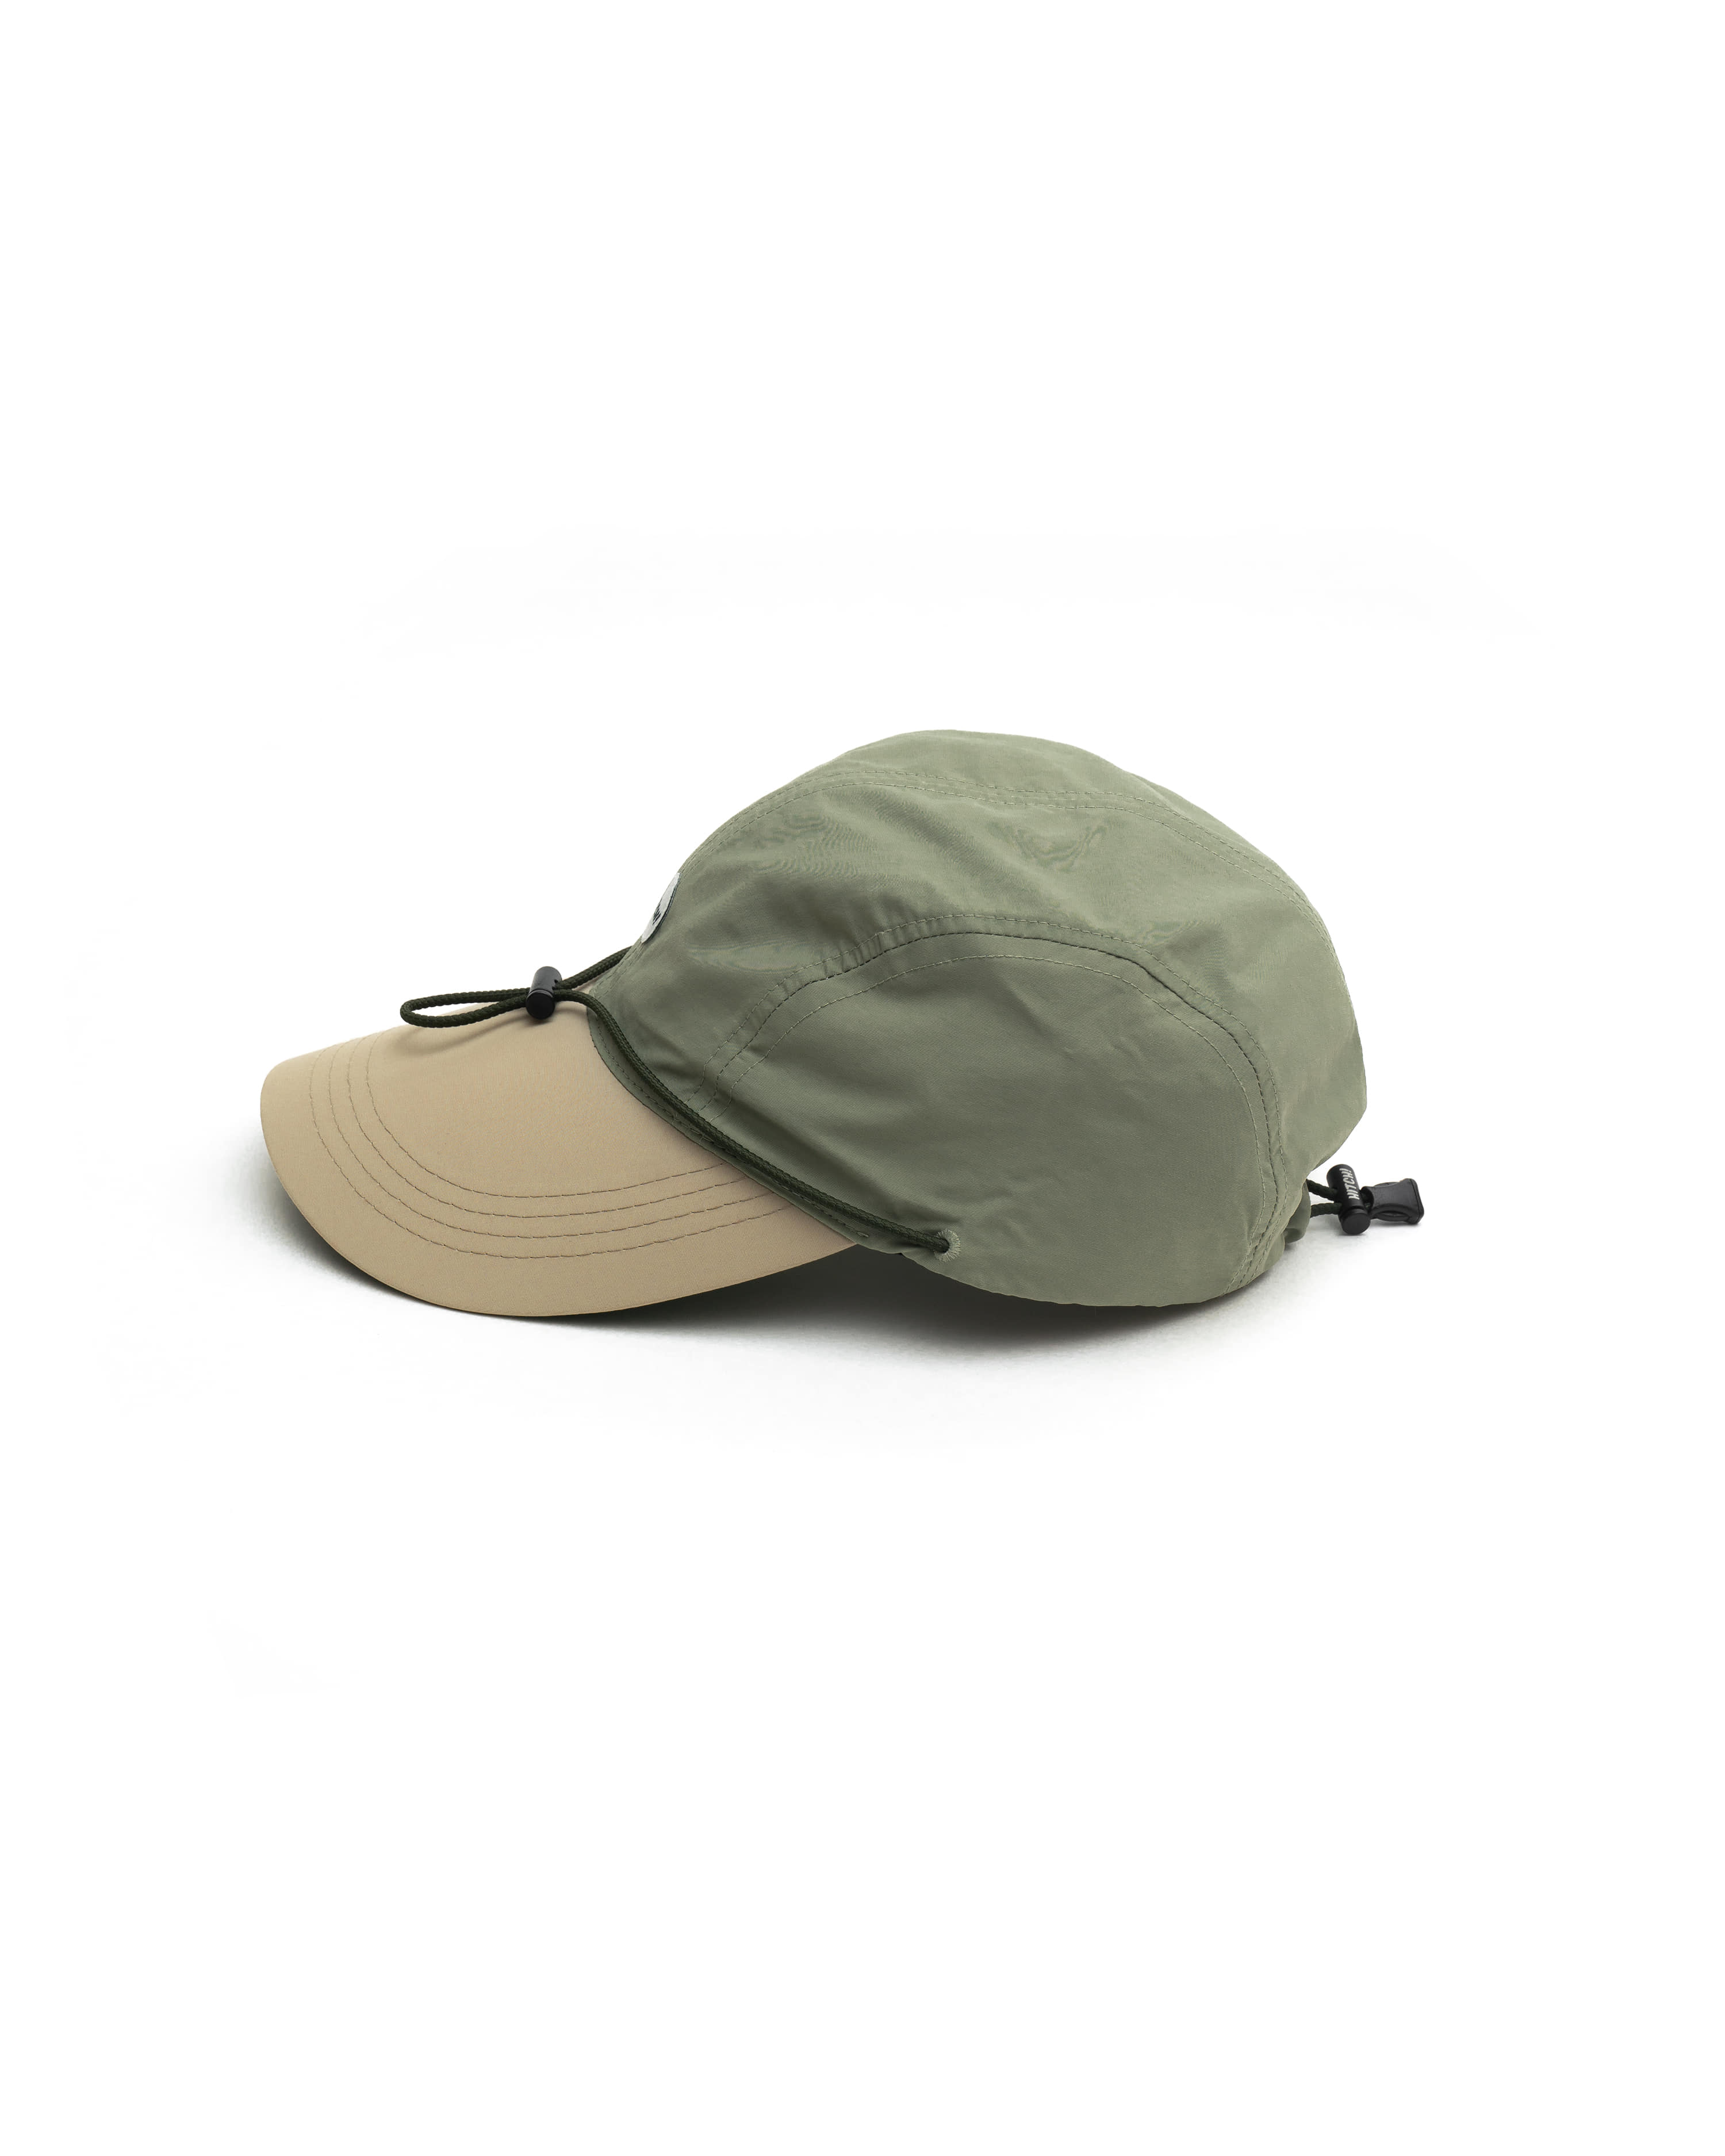 [New Color] River - Olive Green (Longbill)